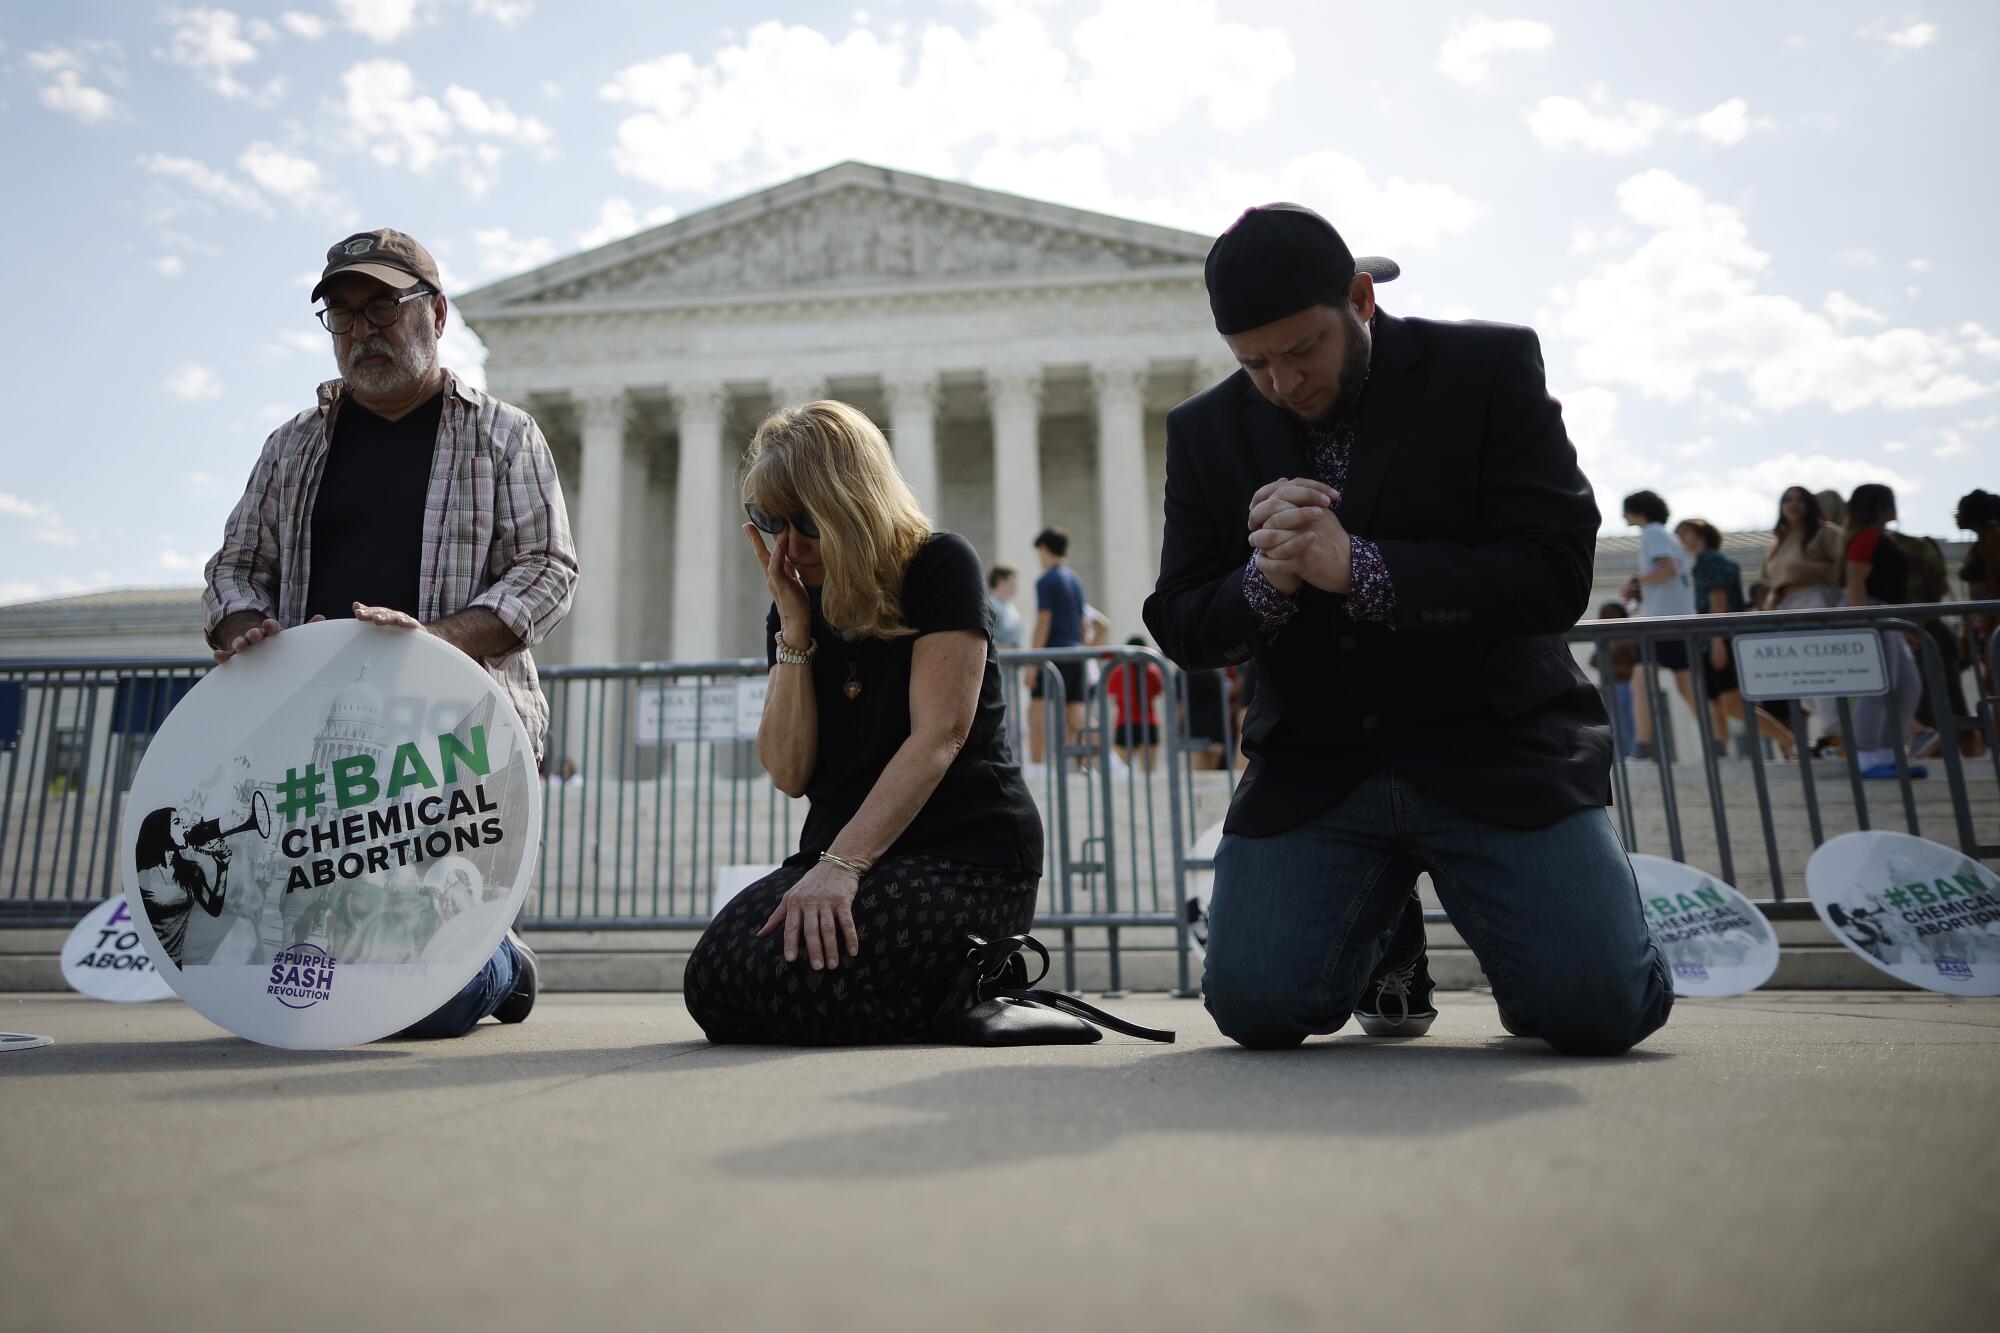 Antiabortion activists pray outside the U.S. Supreme Court.